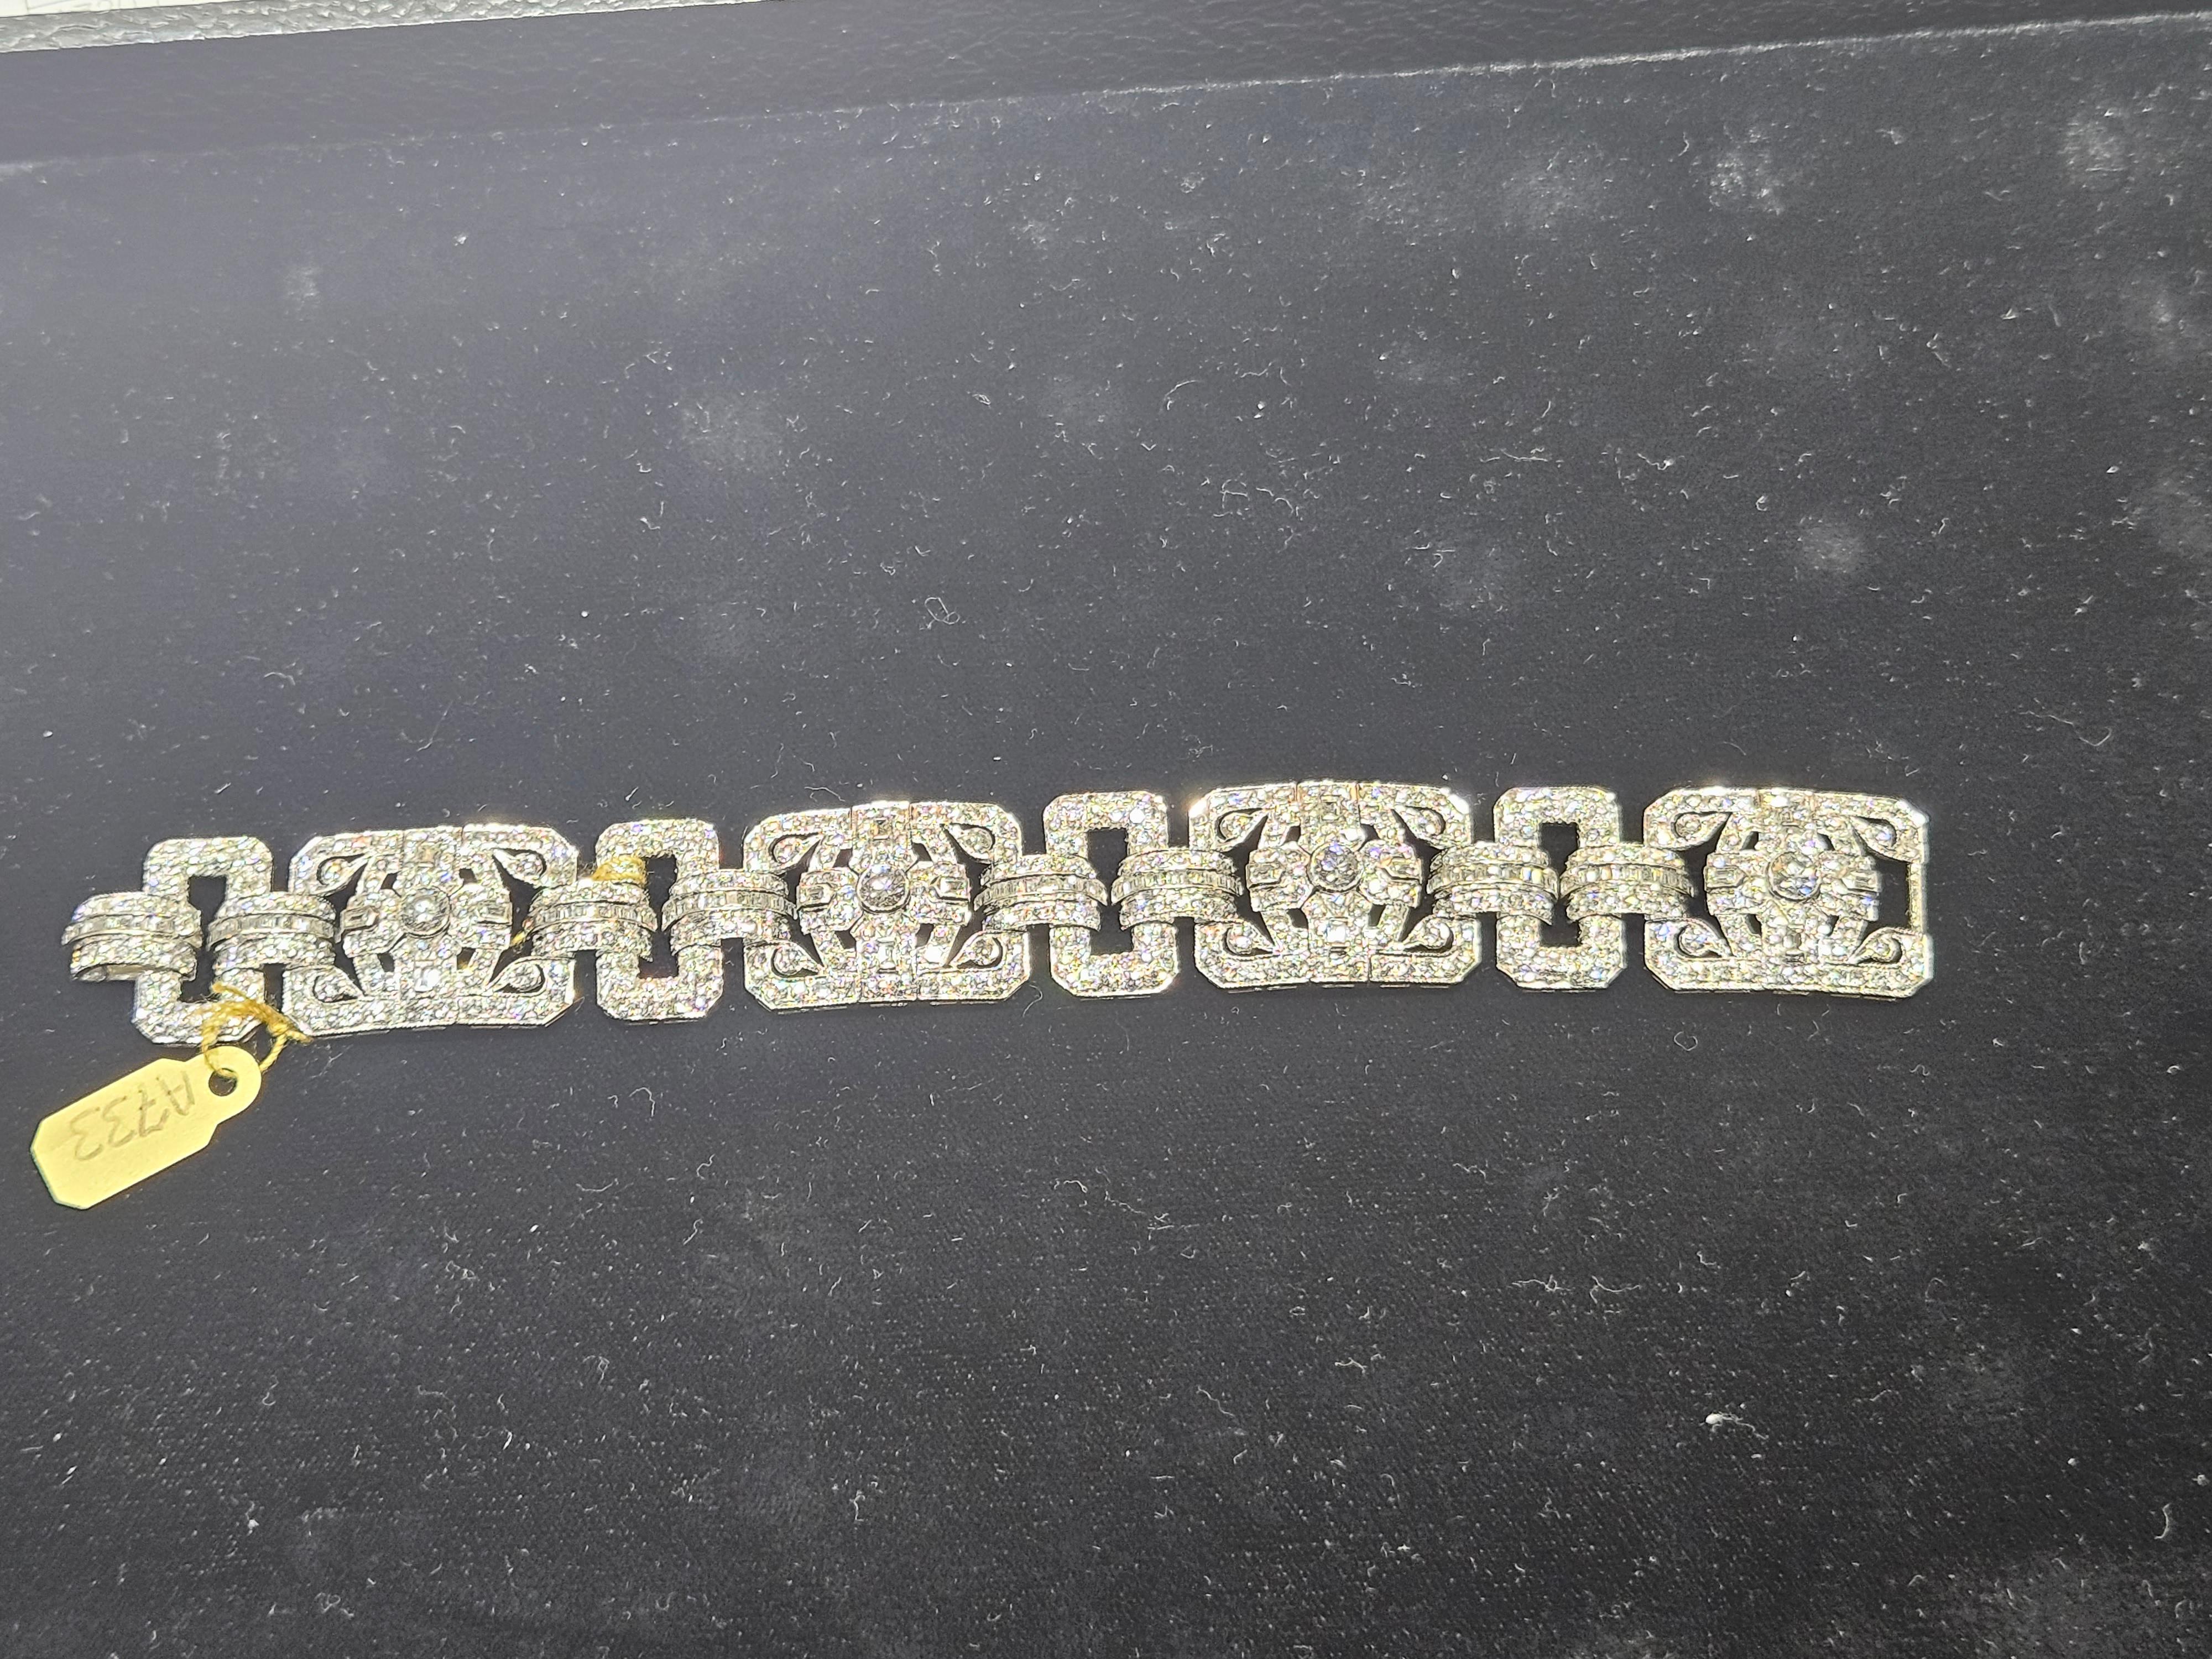 The Following Item we are offering is this Beautiful Rare Important 18KT Gold Sparkling Bracelet. This Rare Art Deco Design Bracelet features an Array of Magnificent Rare Assorted Gorgeous Fancy Diamonds surrounding Magnificent Round Diamonds.